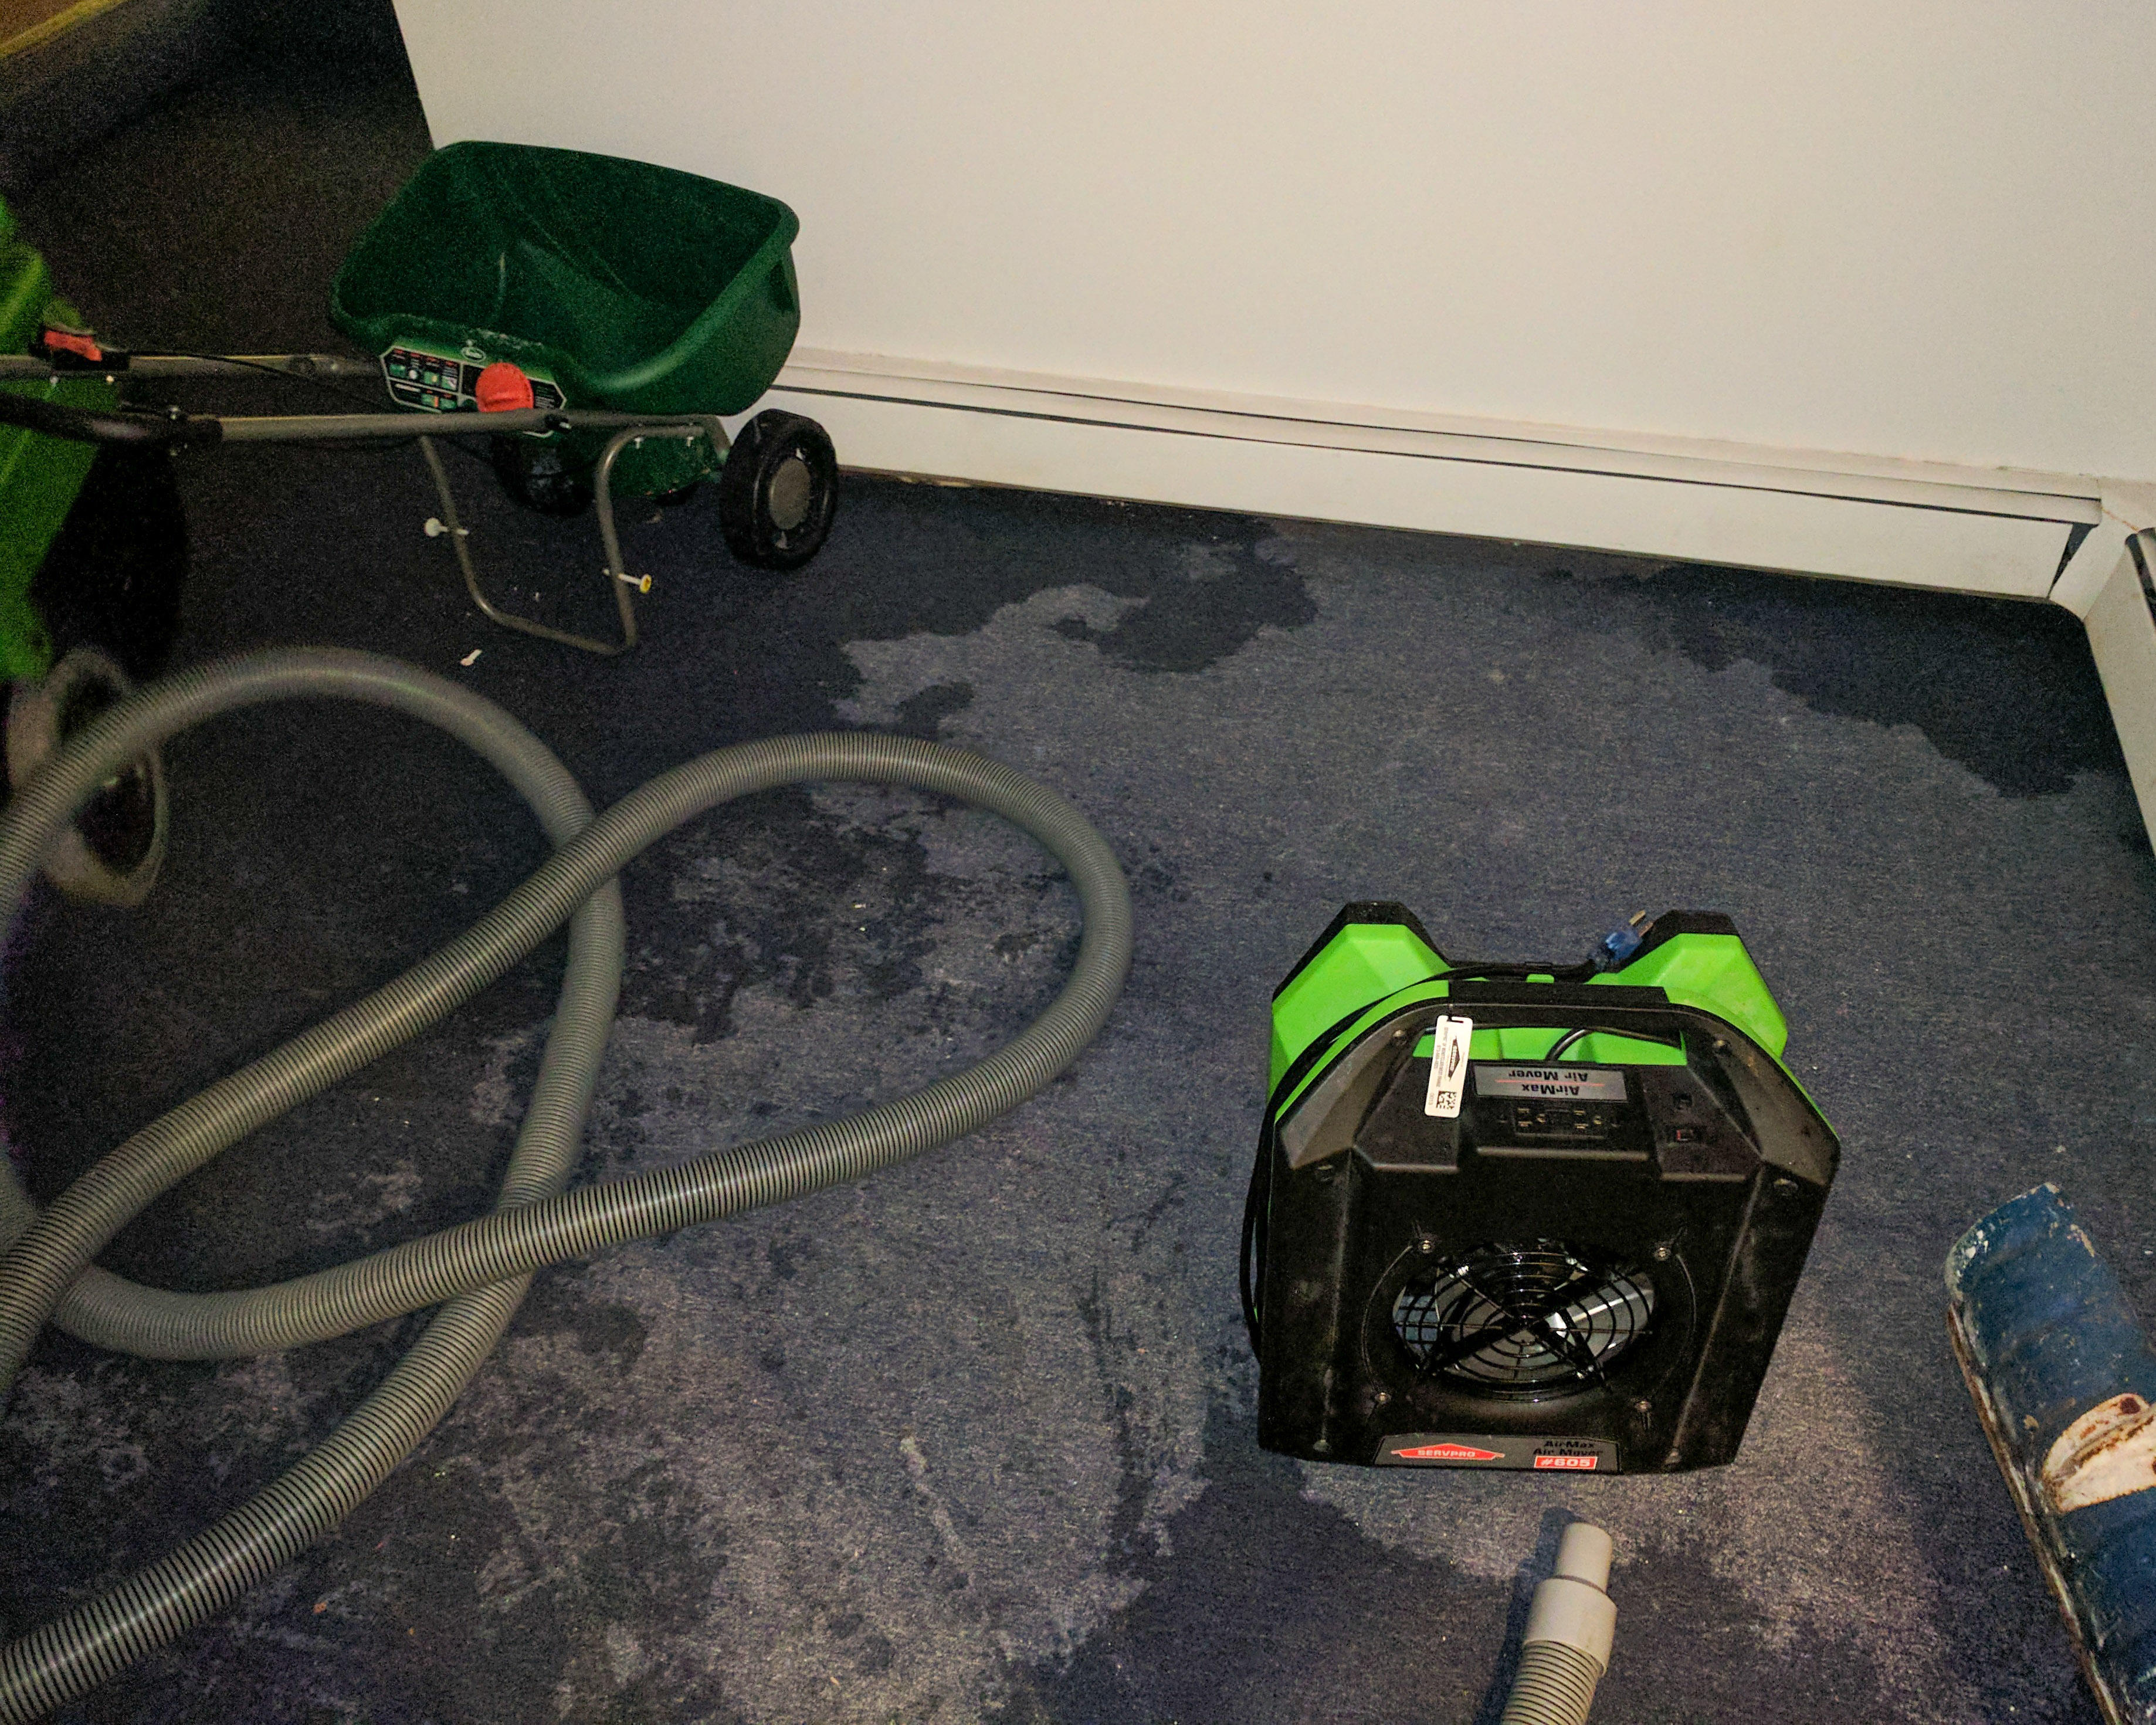 Primary damage may become more significant and secondary damage may become more likely 24 hours following a water loss. For emergency water restoration services in Montclair, NJ, contact SERVPRO of Montclair/West Orange 24 hours a day, 365 days a year.